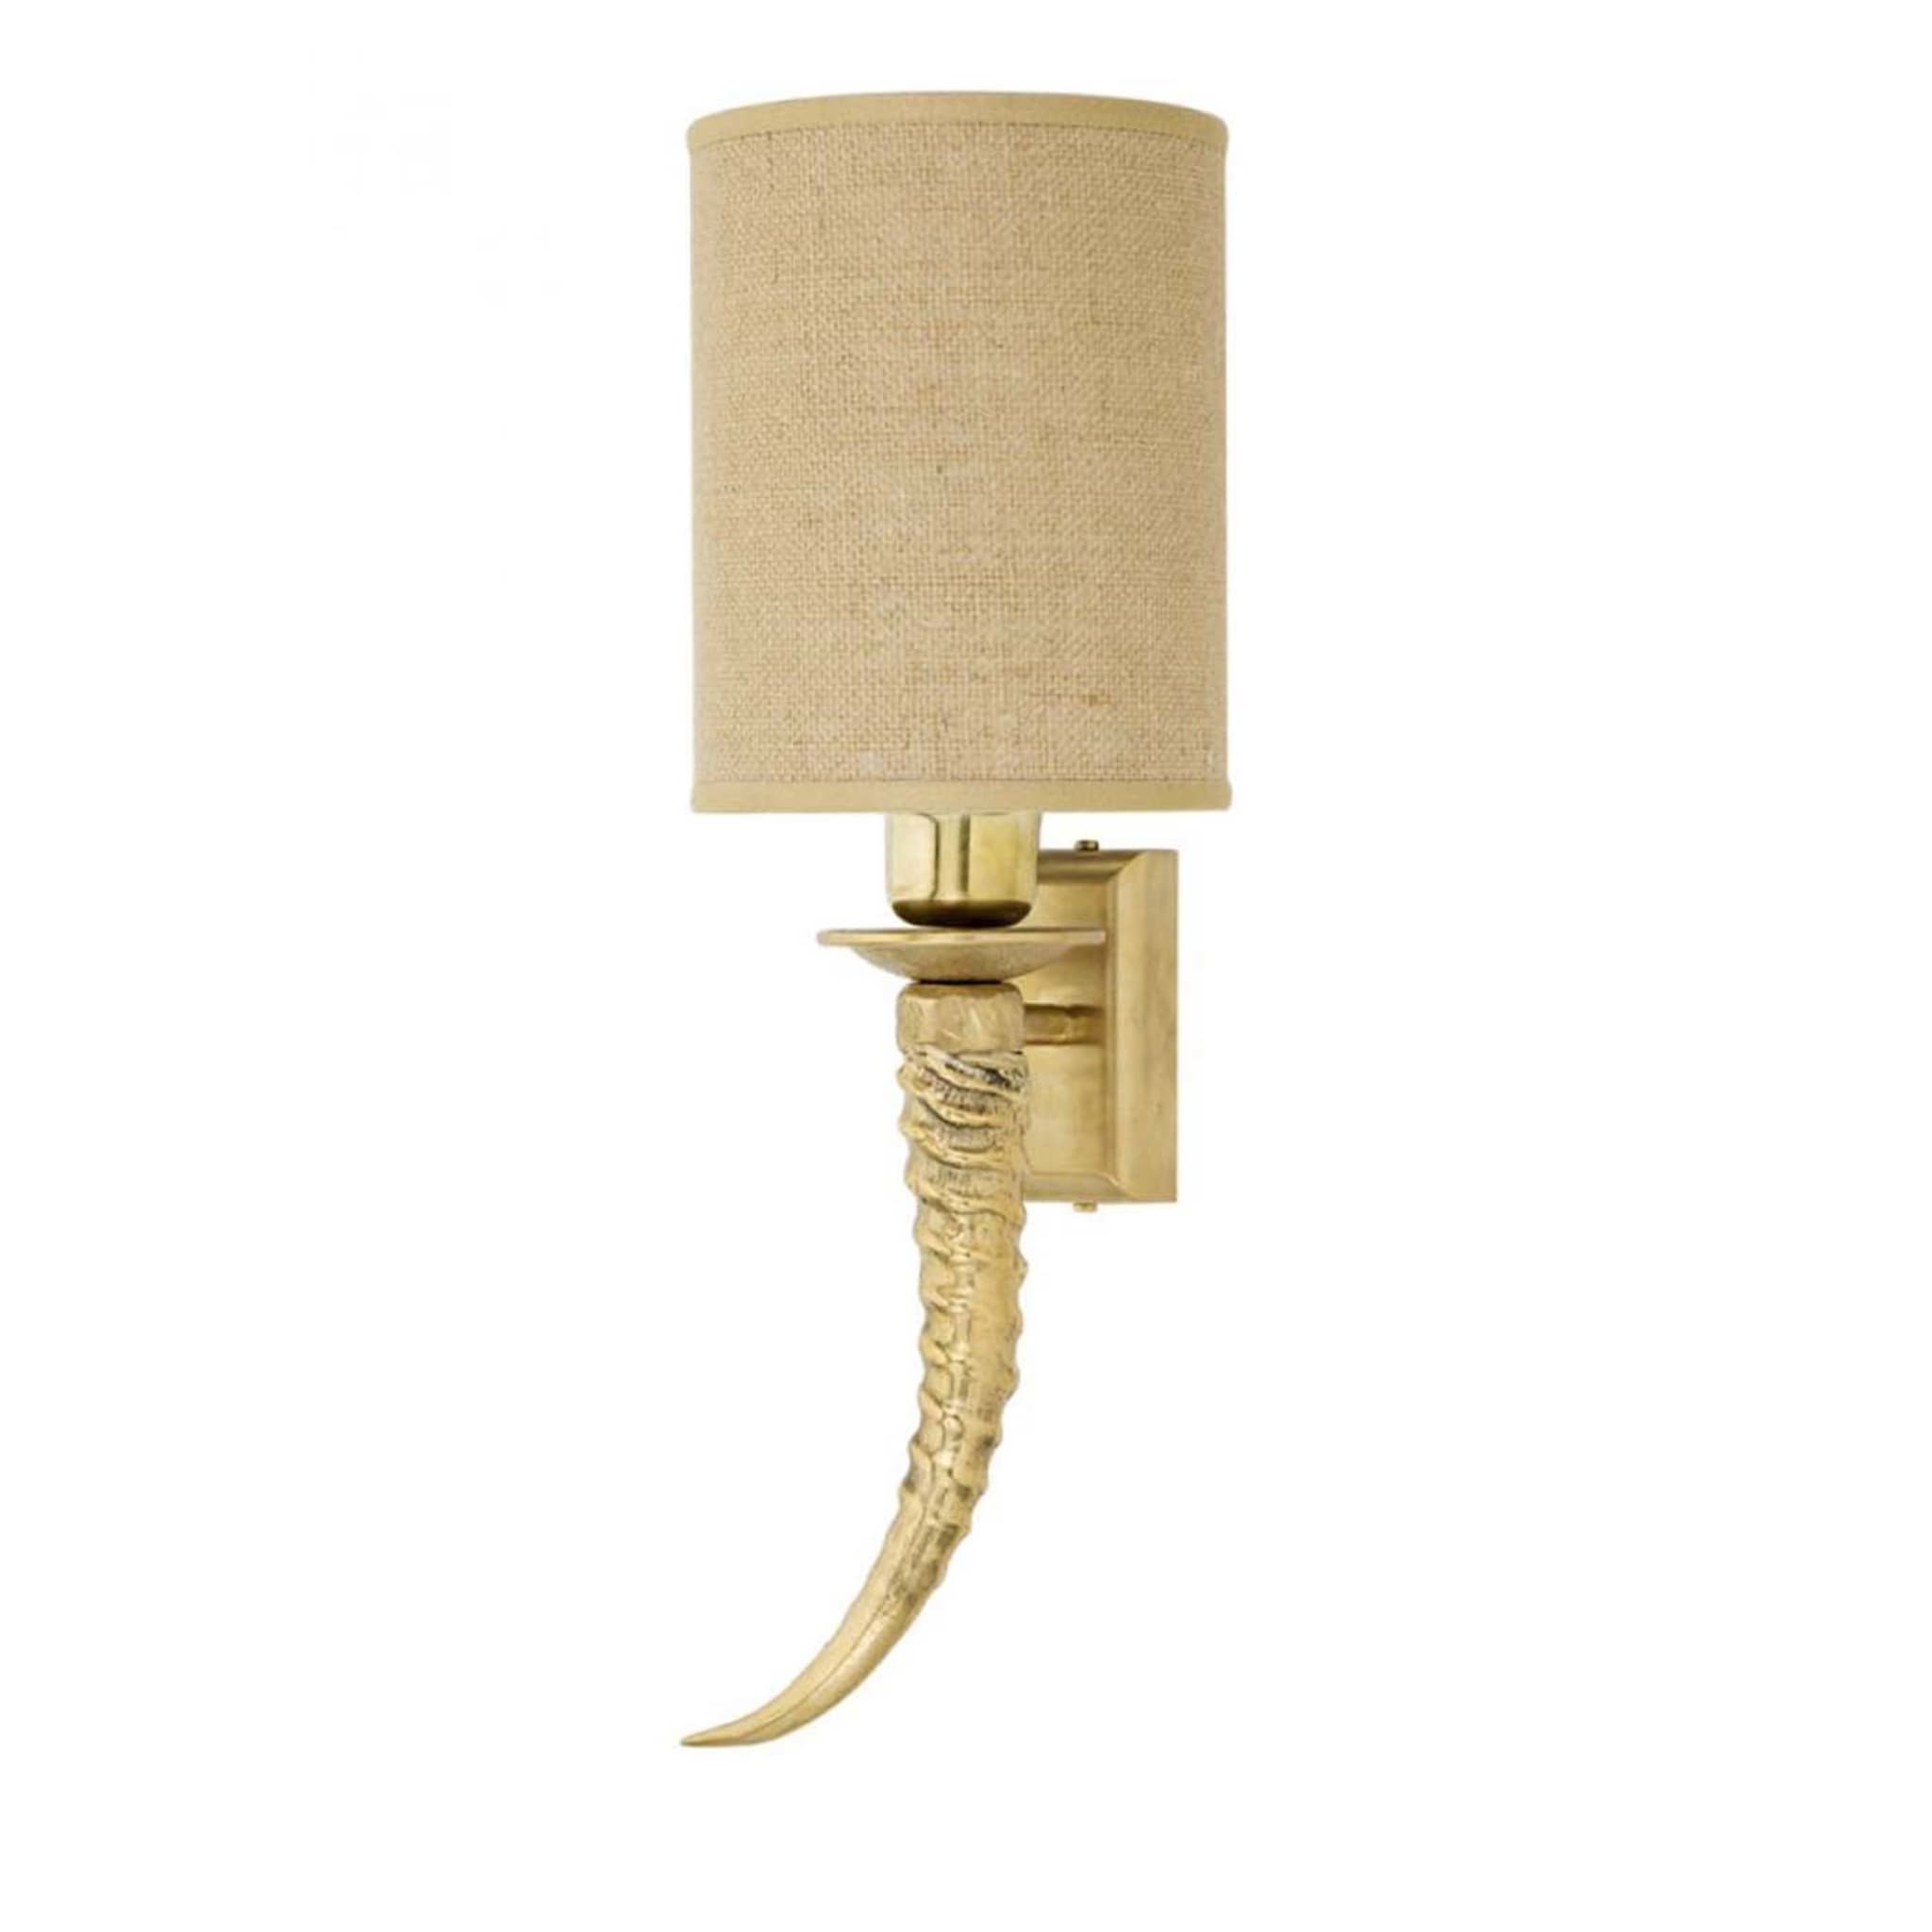 Horn Sconce - Main view